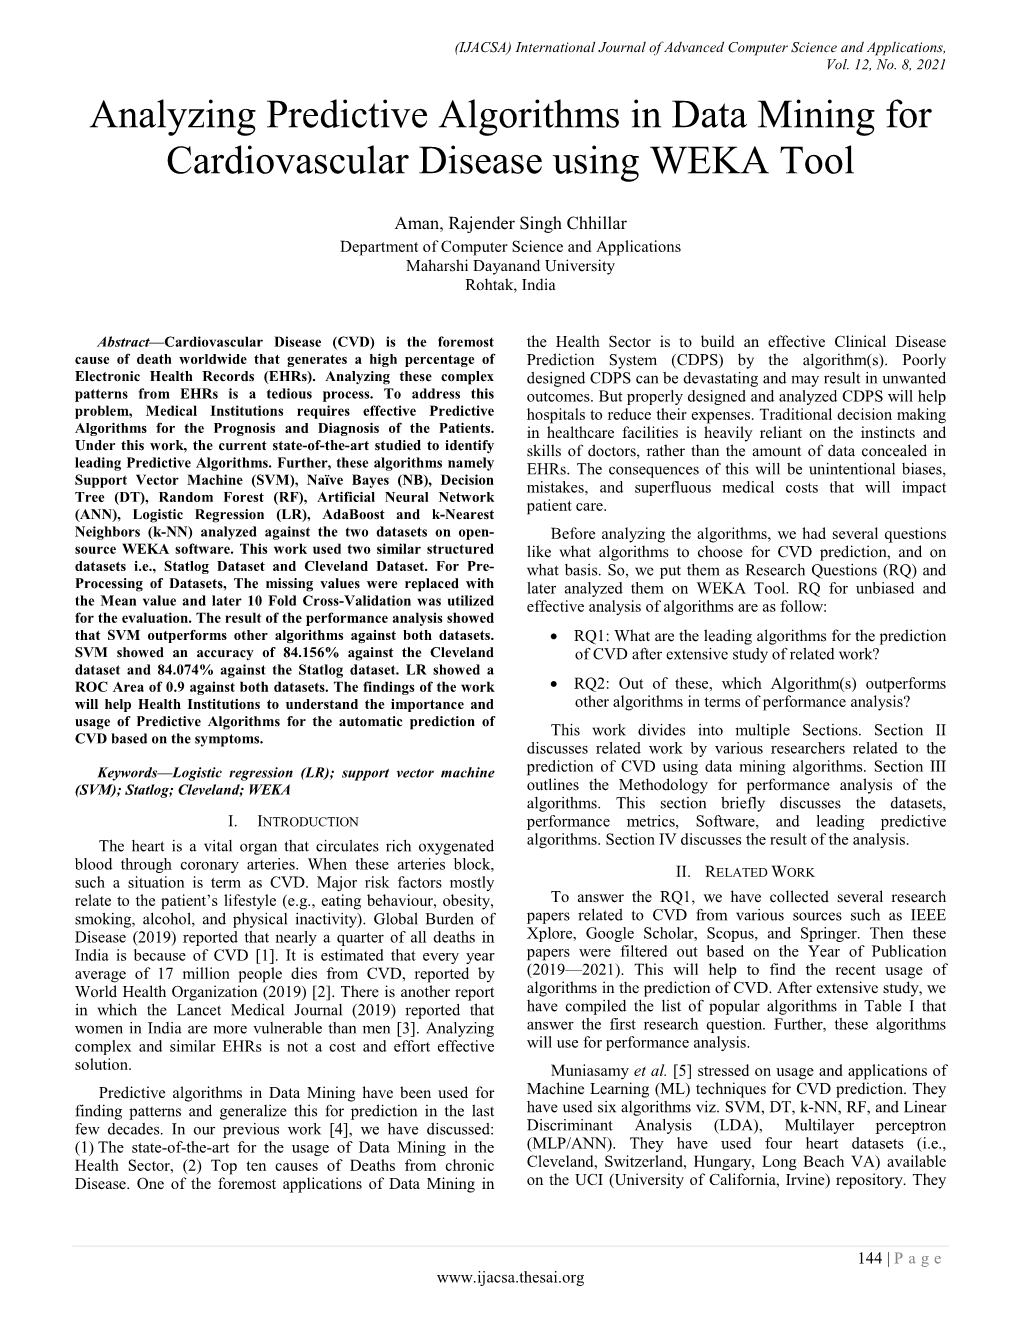 Analyzing Predictive Algorithms in Data Mining for Cardiovascular Disease Using WEKA Tool